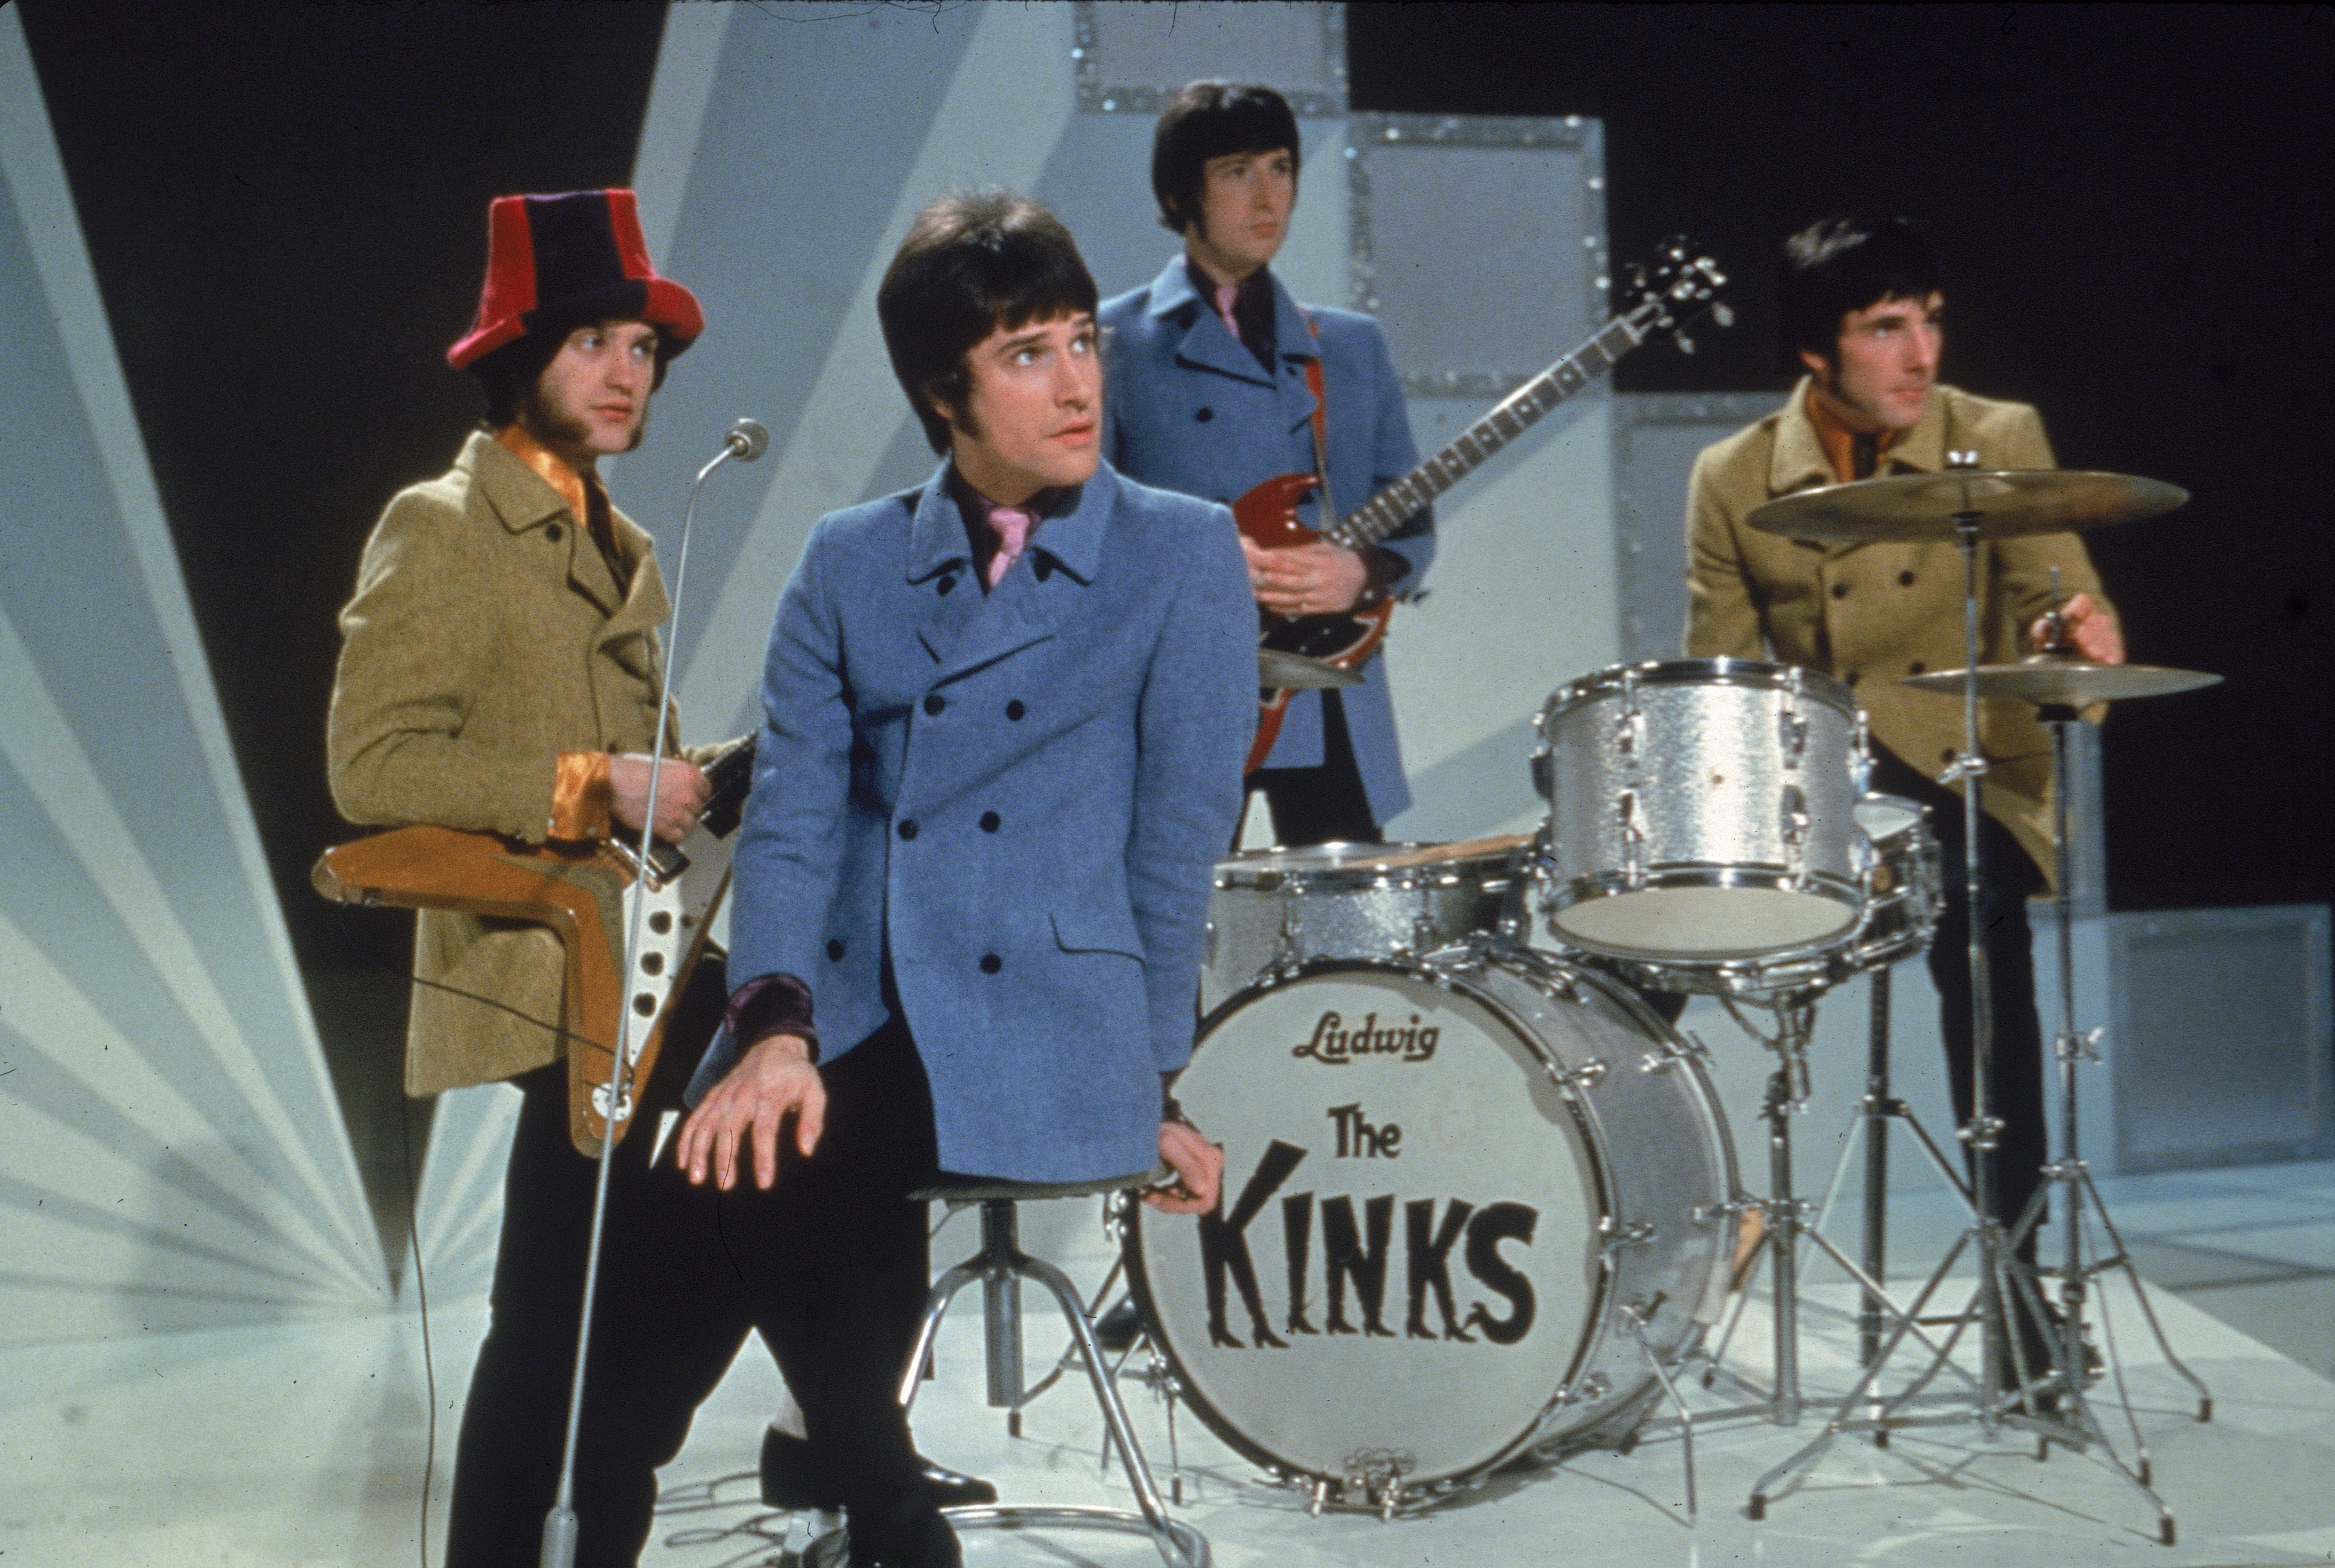 The band’s original line-up (from left), Dave Davies, Ray Davies, Peter Quaife and Mick Avory, on the set of a television show in 1968. By the time ‘Lola’ was recorded, Quaife had been replaced by John Dalton